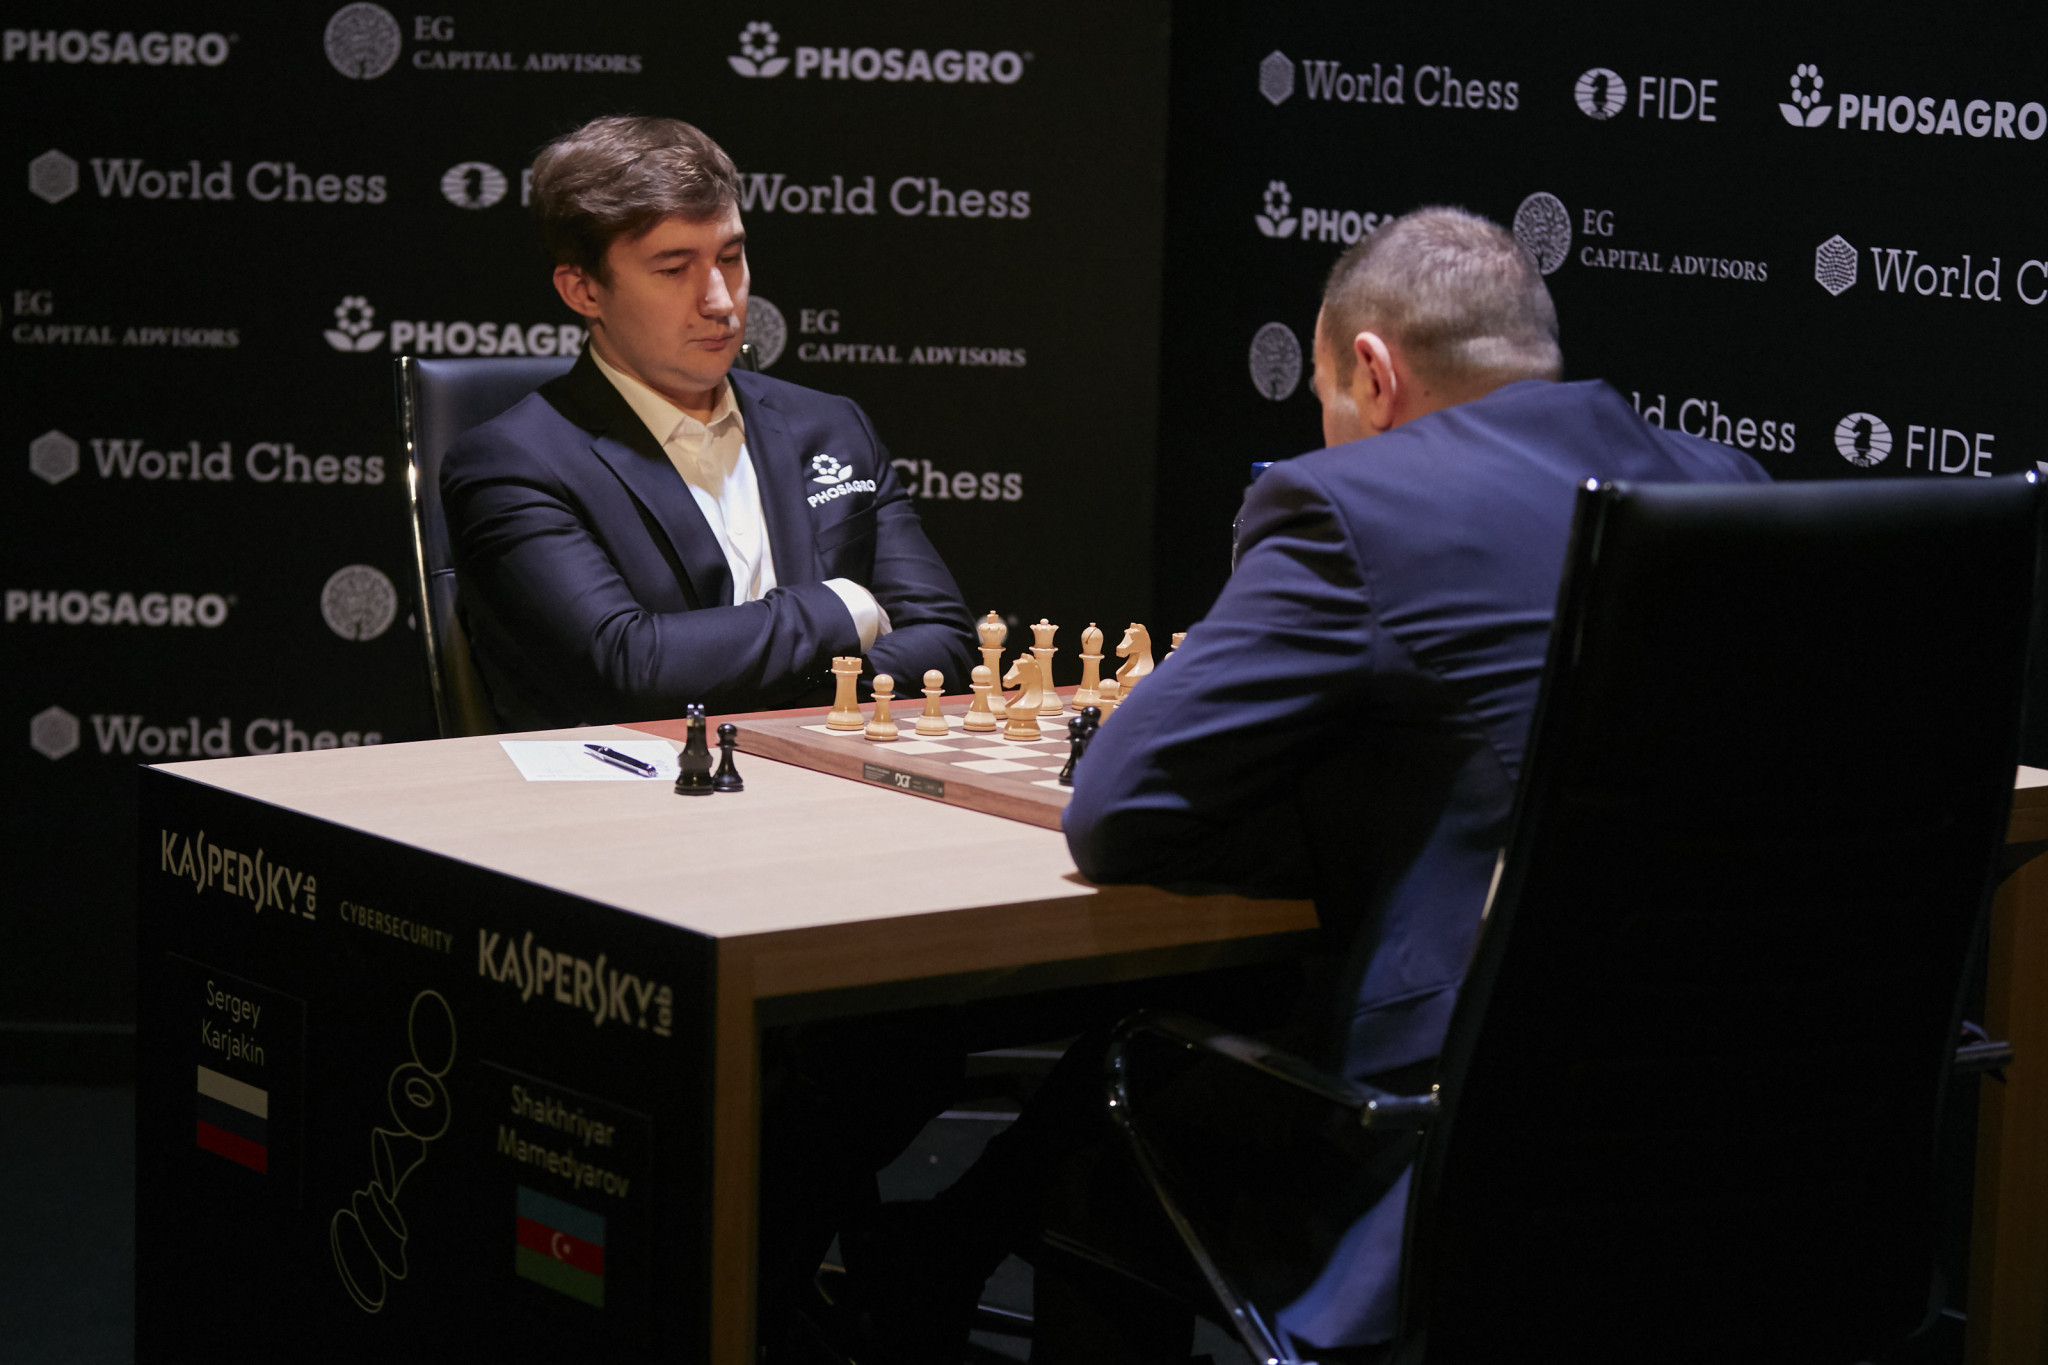 Karjakin's manager says Russian chess grandmaster will not appeal his suspension to the Court of Arbitration for Sport